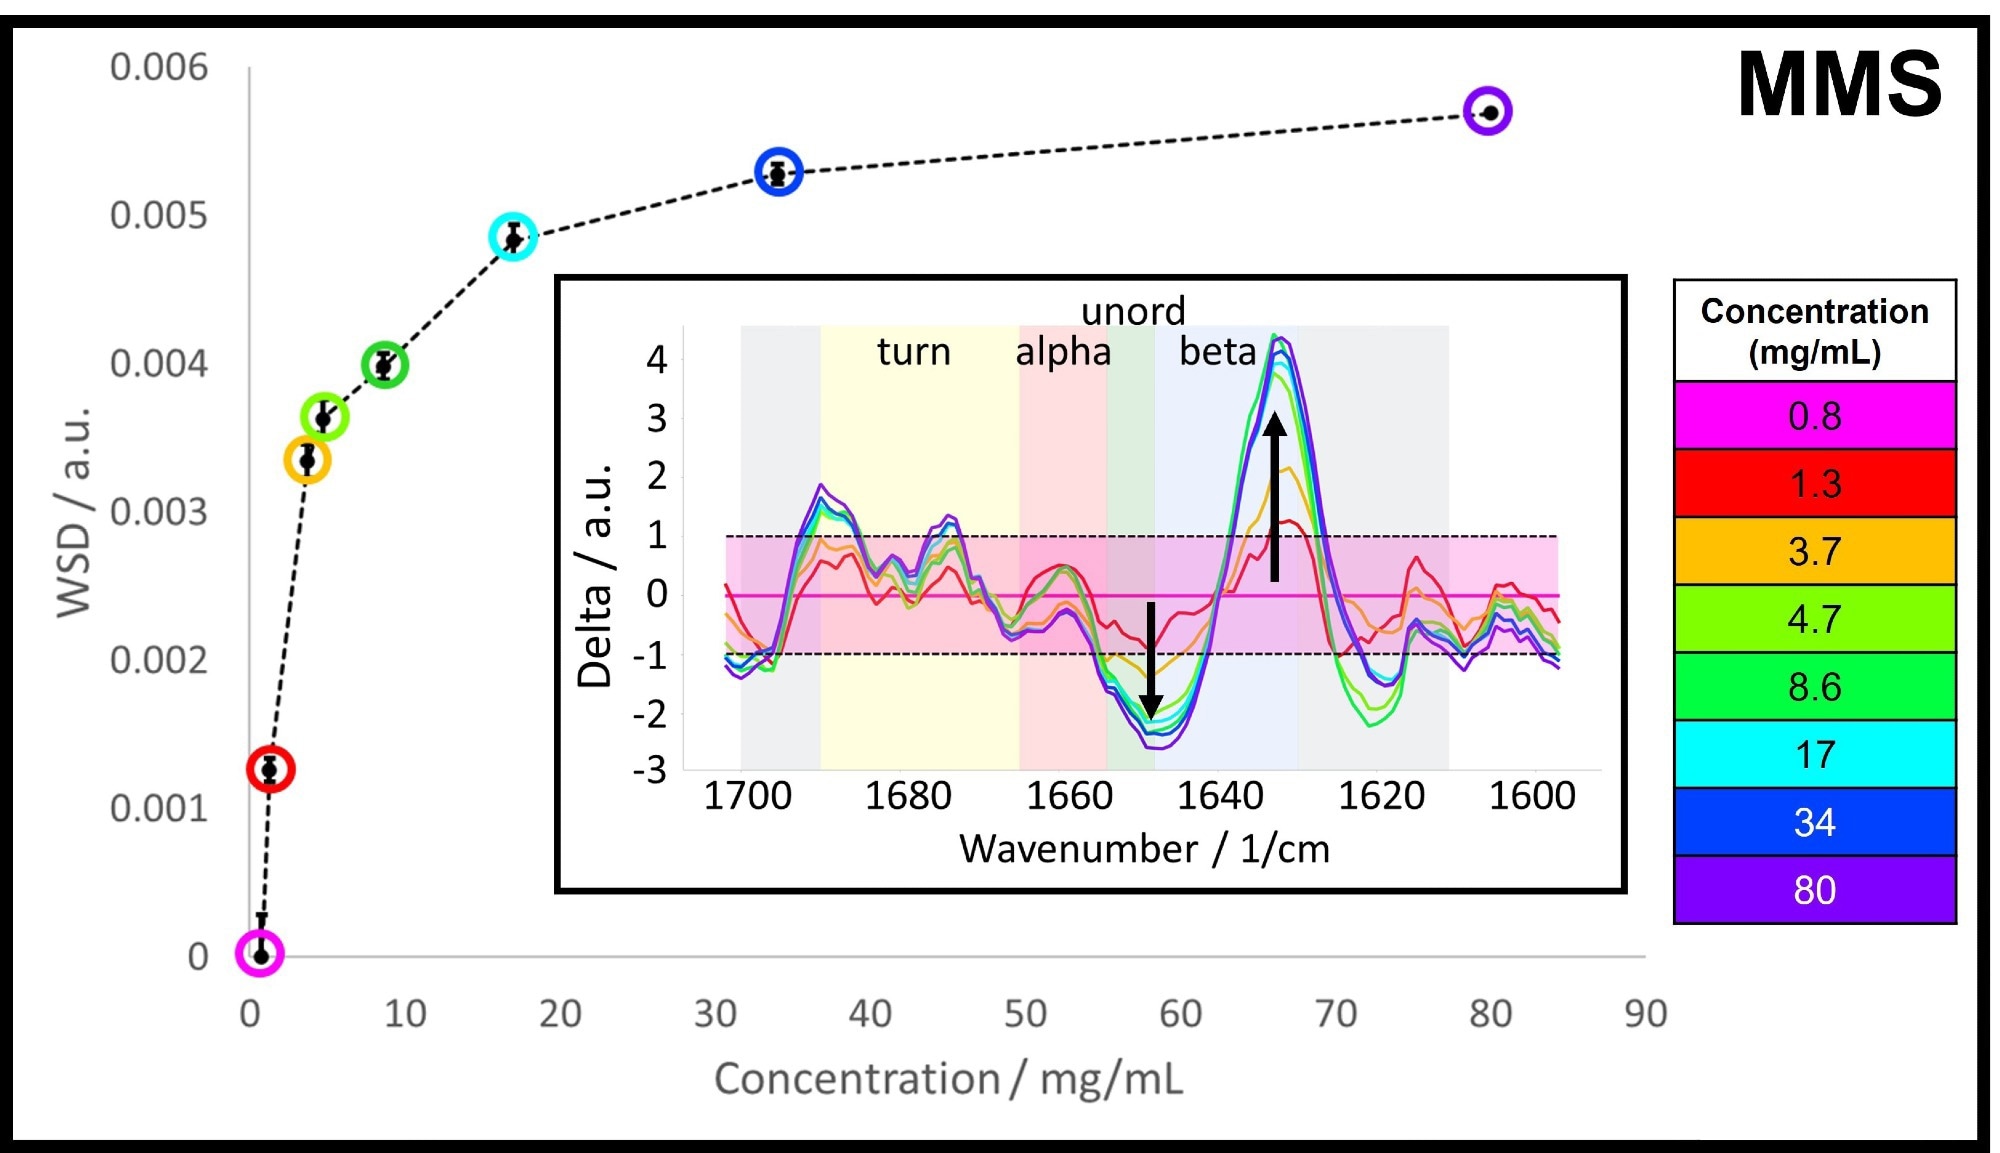 The MMS Weighted Spectral Difference (WSD) across the measured concentration range between 0.8 and 80 mg/mL. Inset: Difference spectra with 0.8 mg/mL as the control spectrum, the background is color-coded according to the typical spectral ranges for the individual structural motifs